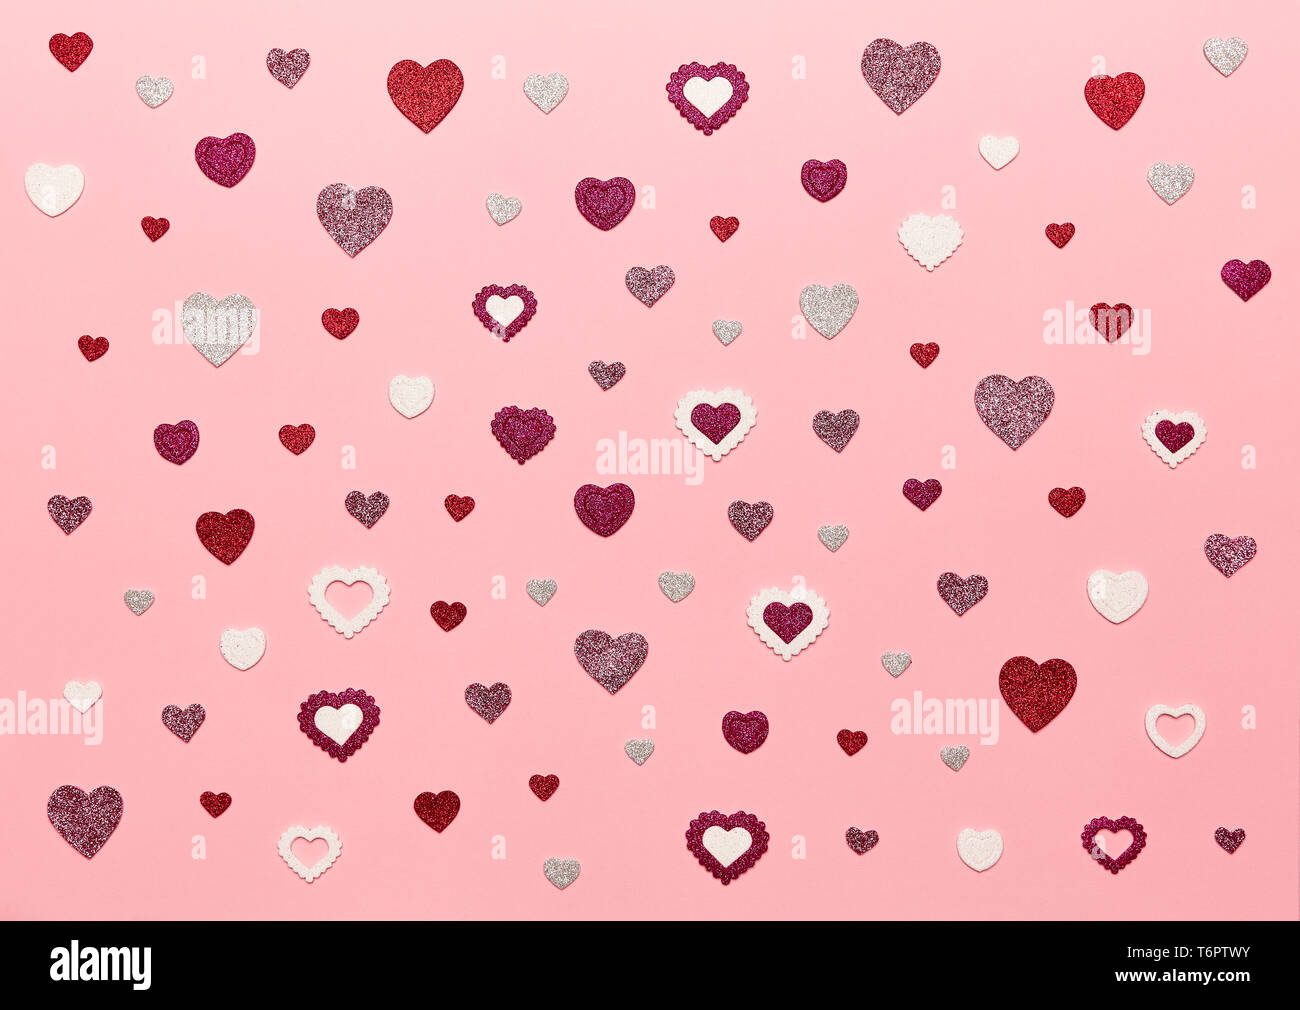 Download free Aesthetic Cute Valentines Heart Glasses Wallpaper 